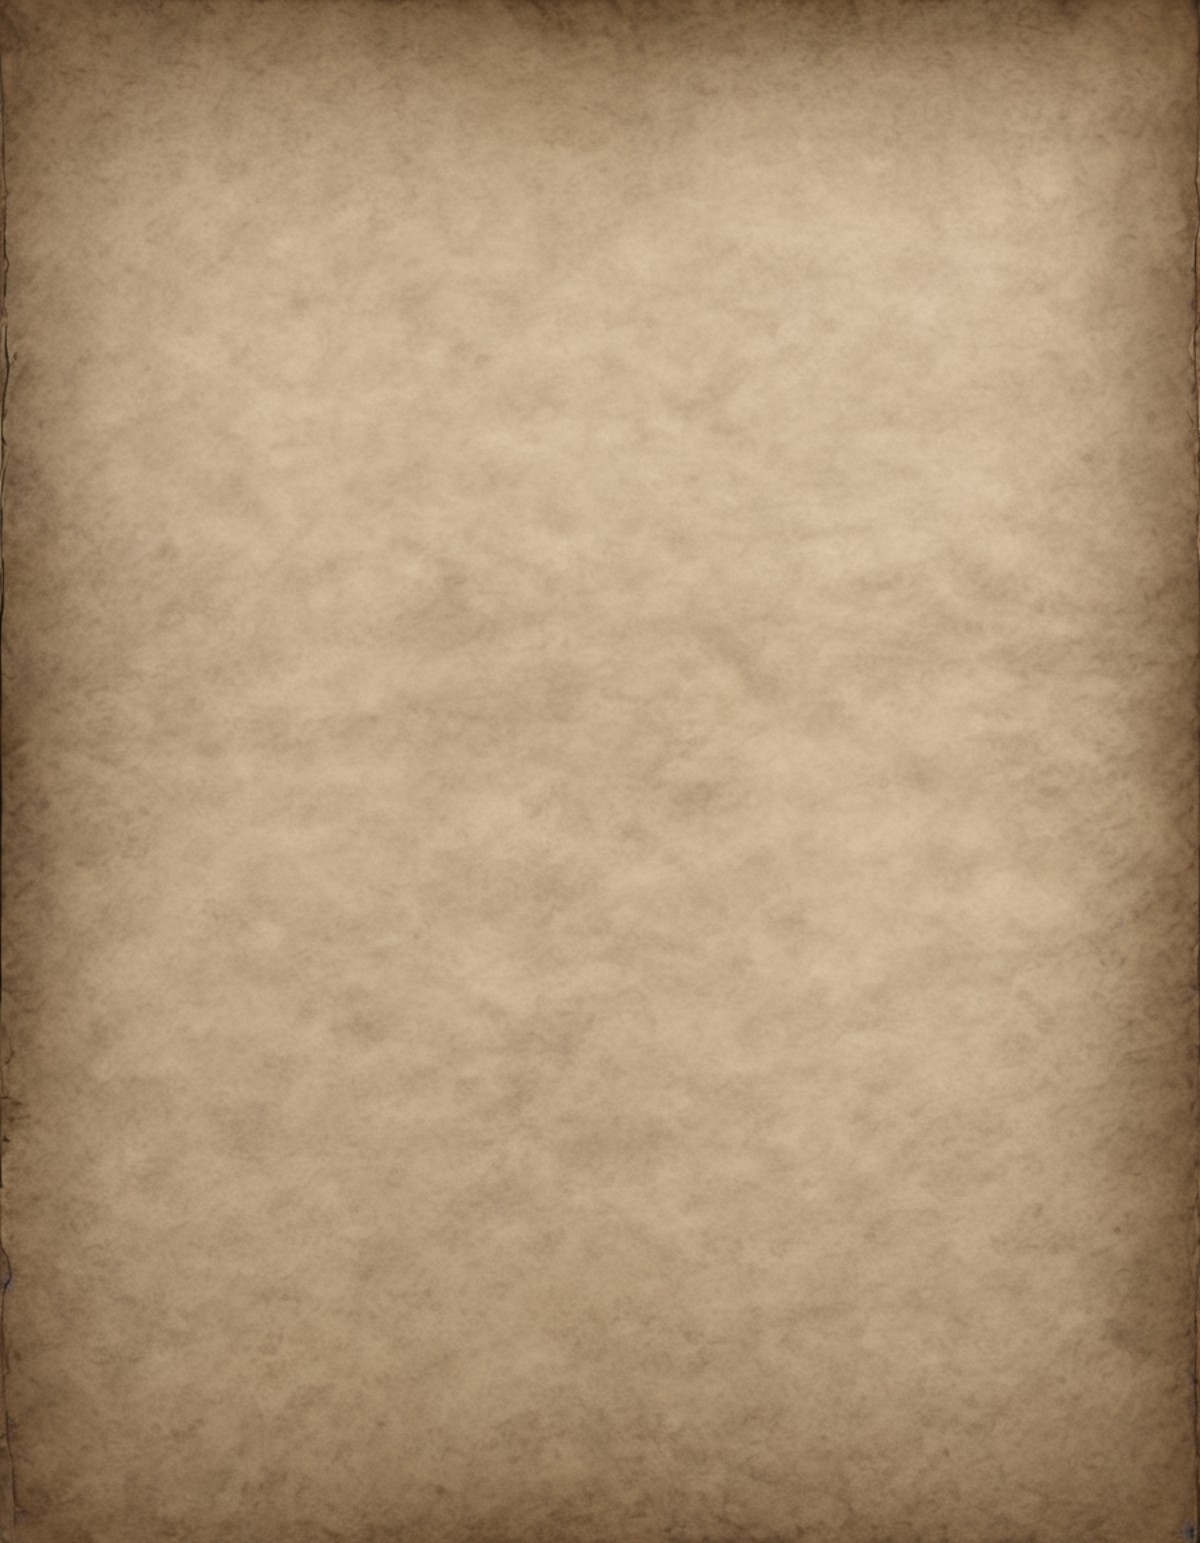 a blank sheet of dark stained mottled parchment